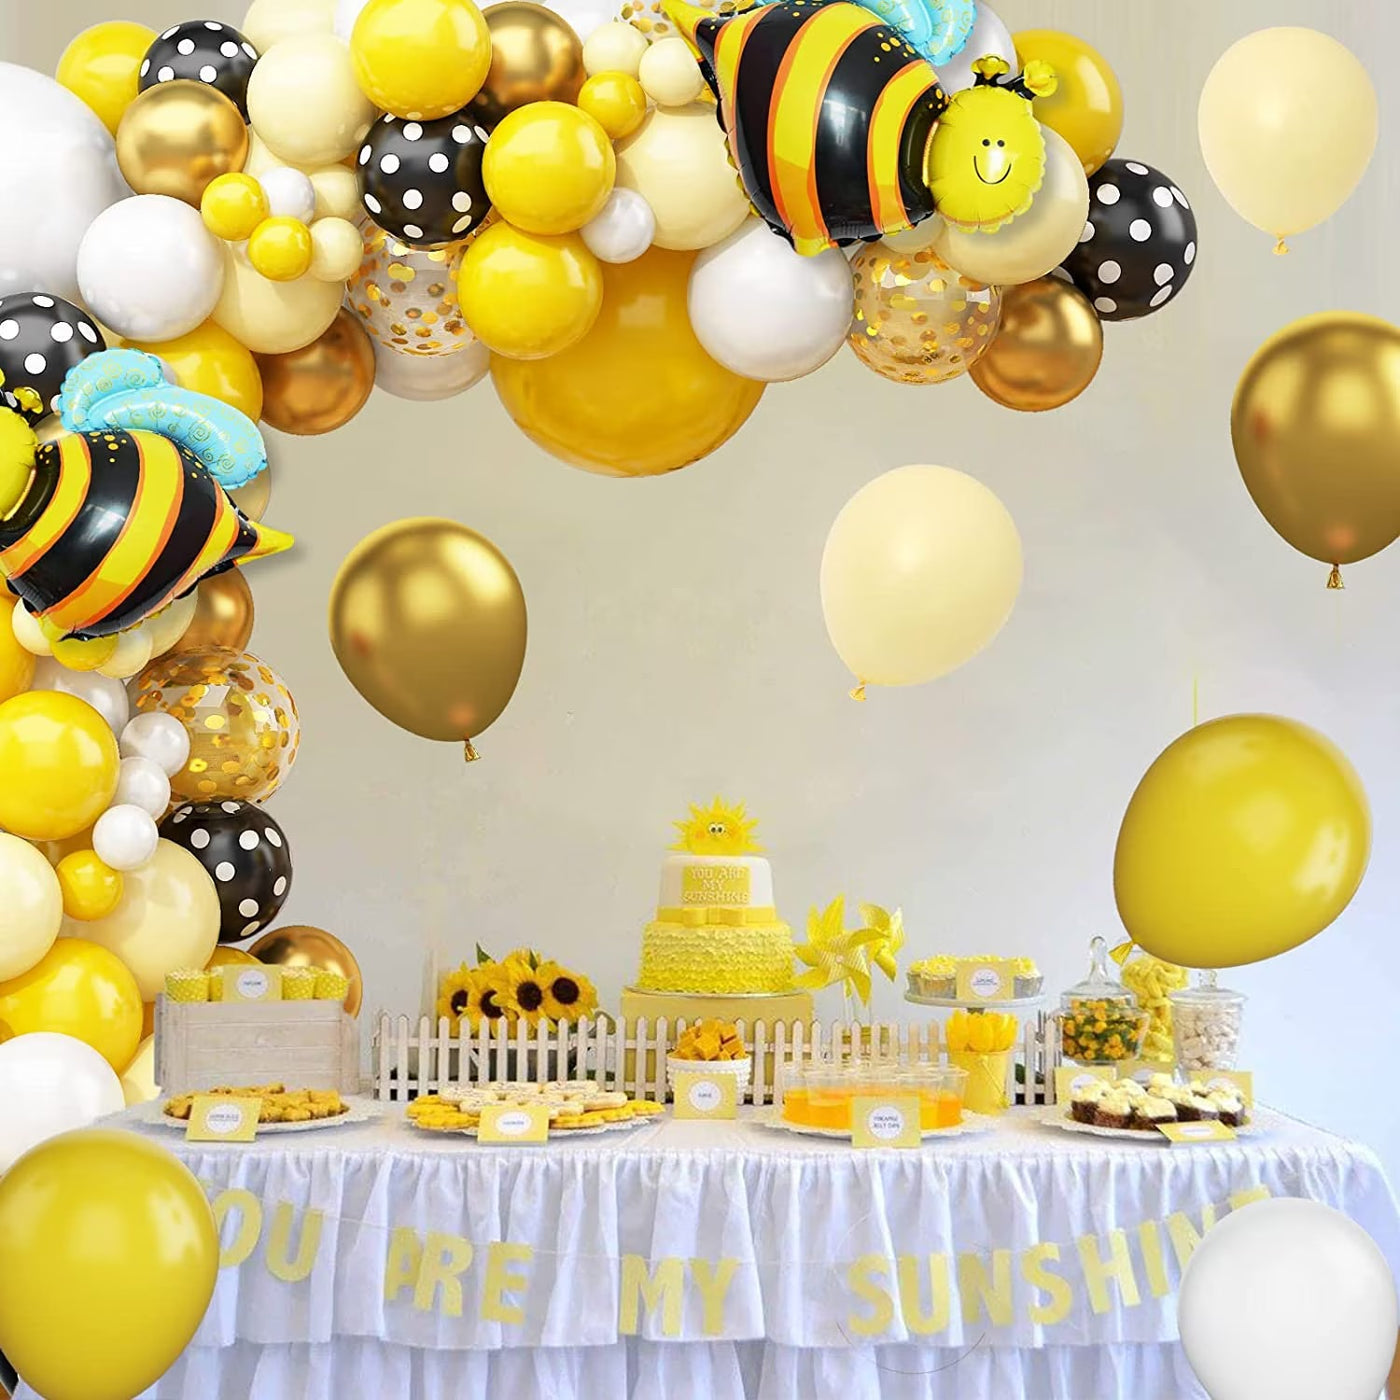 Bee Balloon Arch Garland contains everything you need to make a summer garland. This is a great idea for Easter and summer-themed events, Gender reveals, birthday parties, baby showers, graduation parties, and anything summer-related!